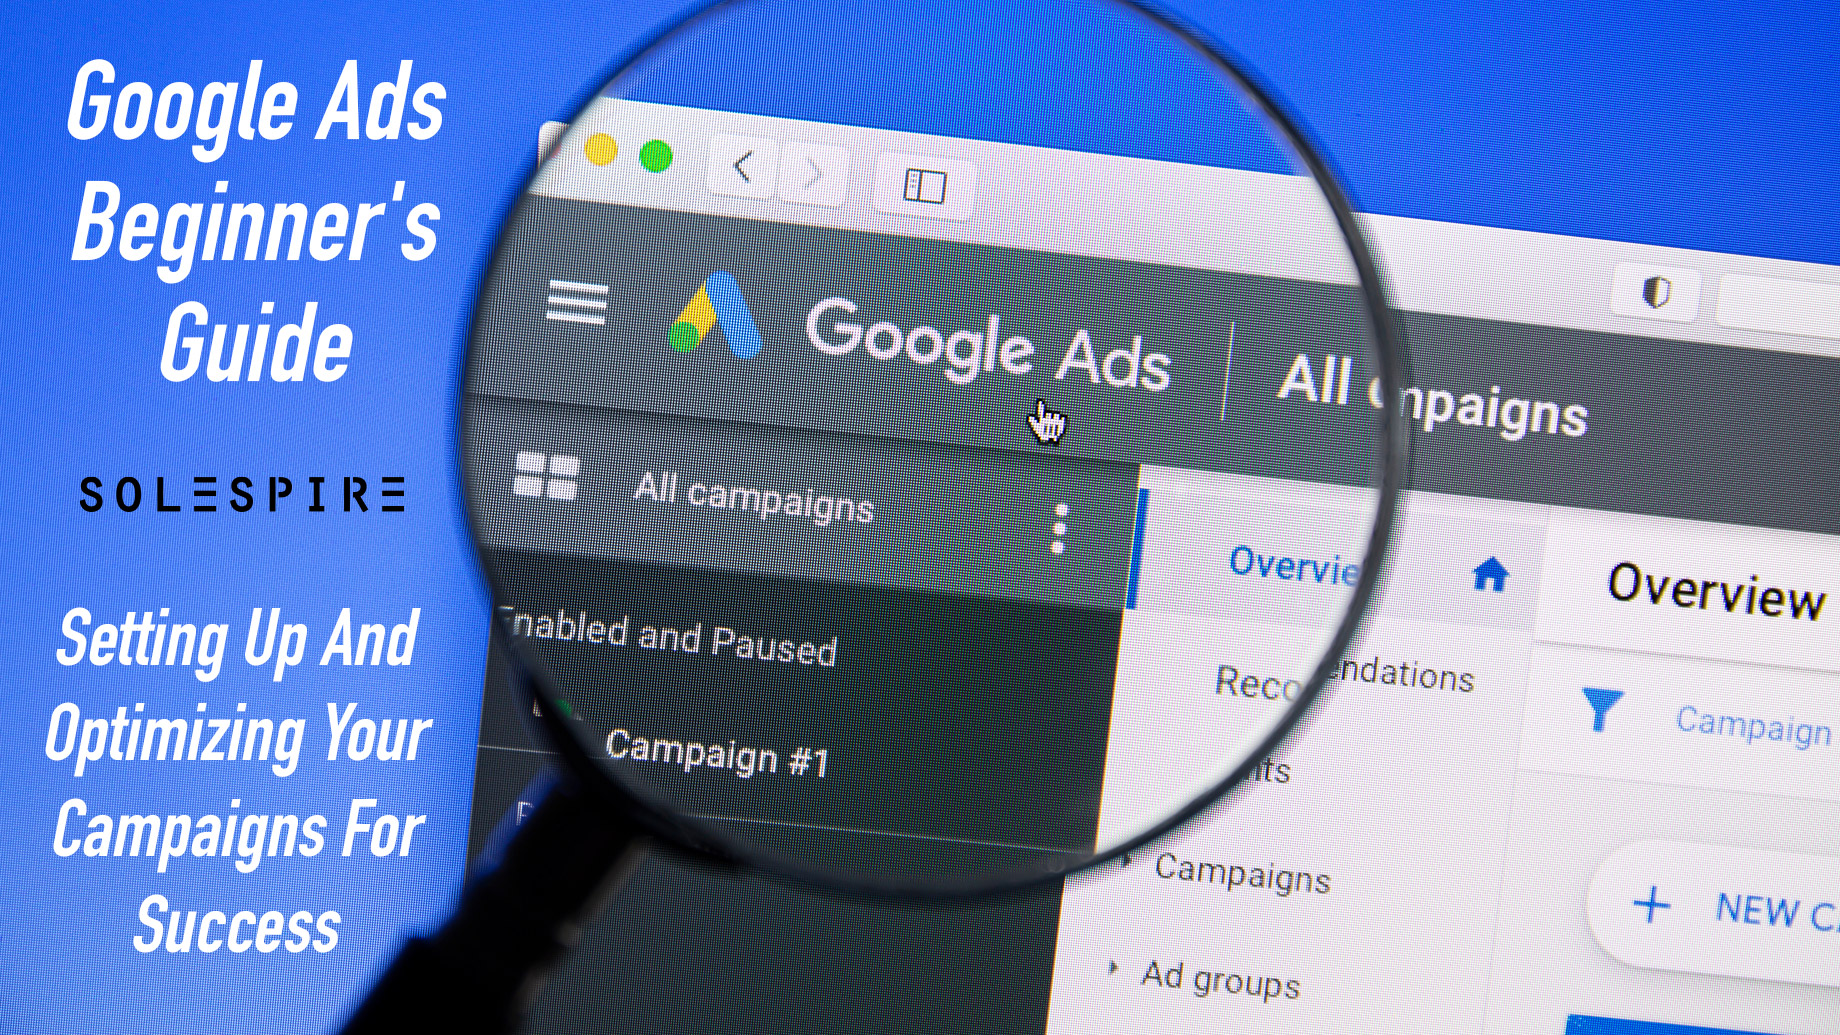 Google Ads Beginner's Guide: Setting Up And Optimizing Your Campaigns For Success